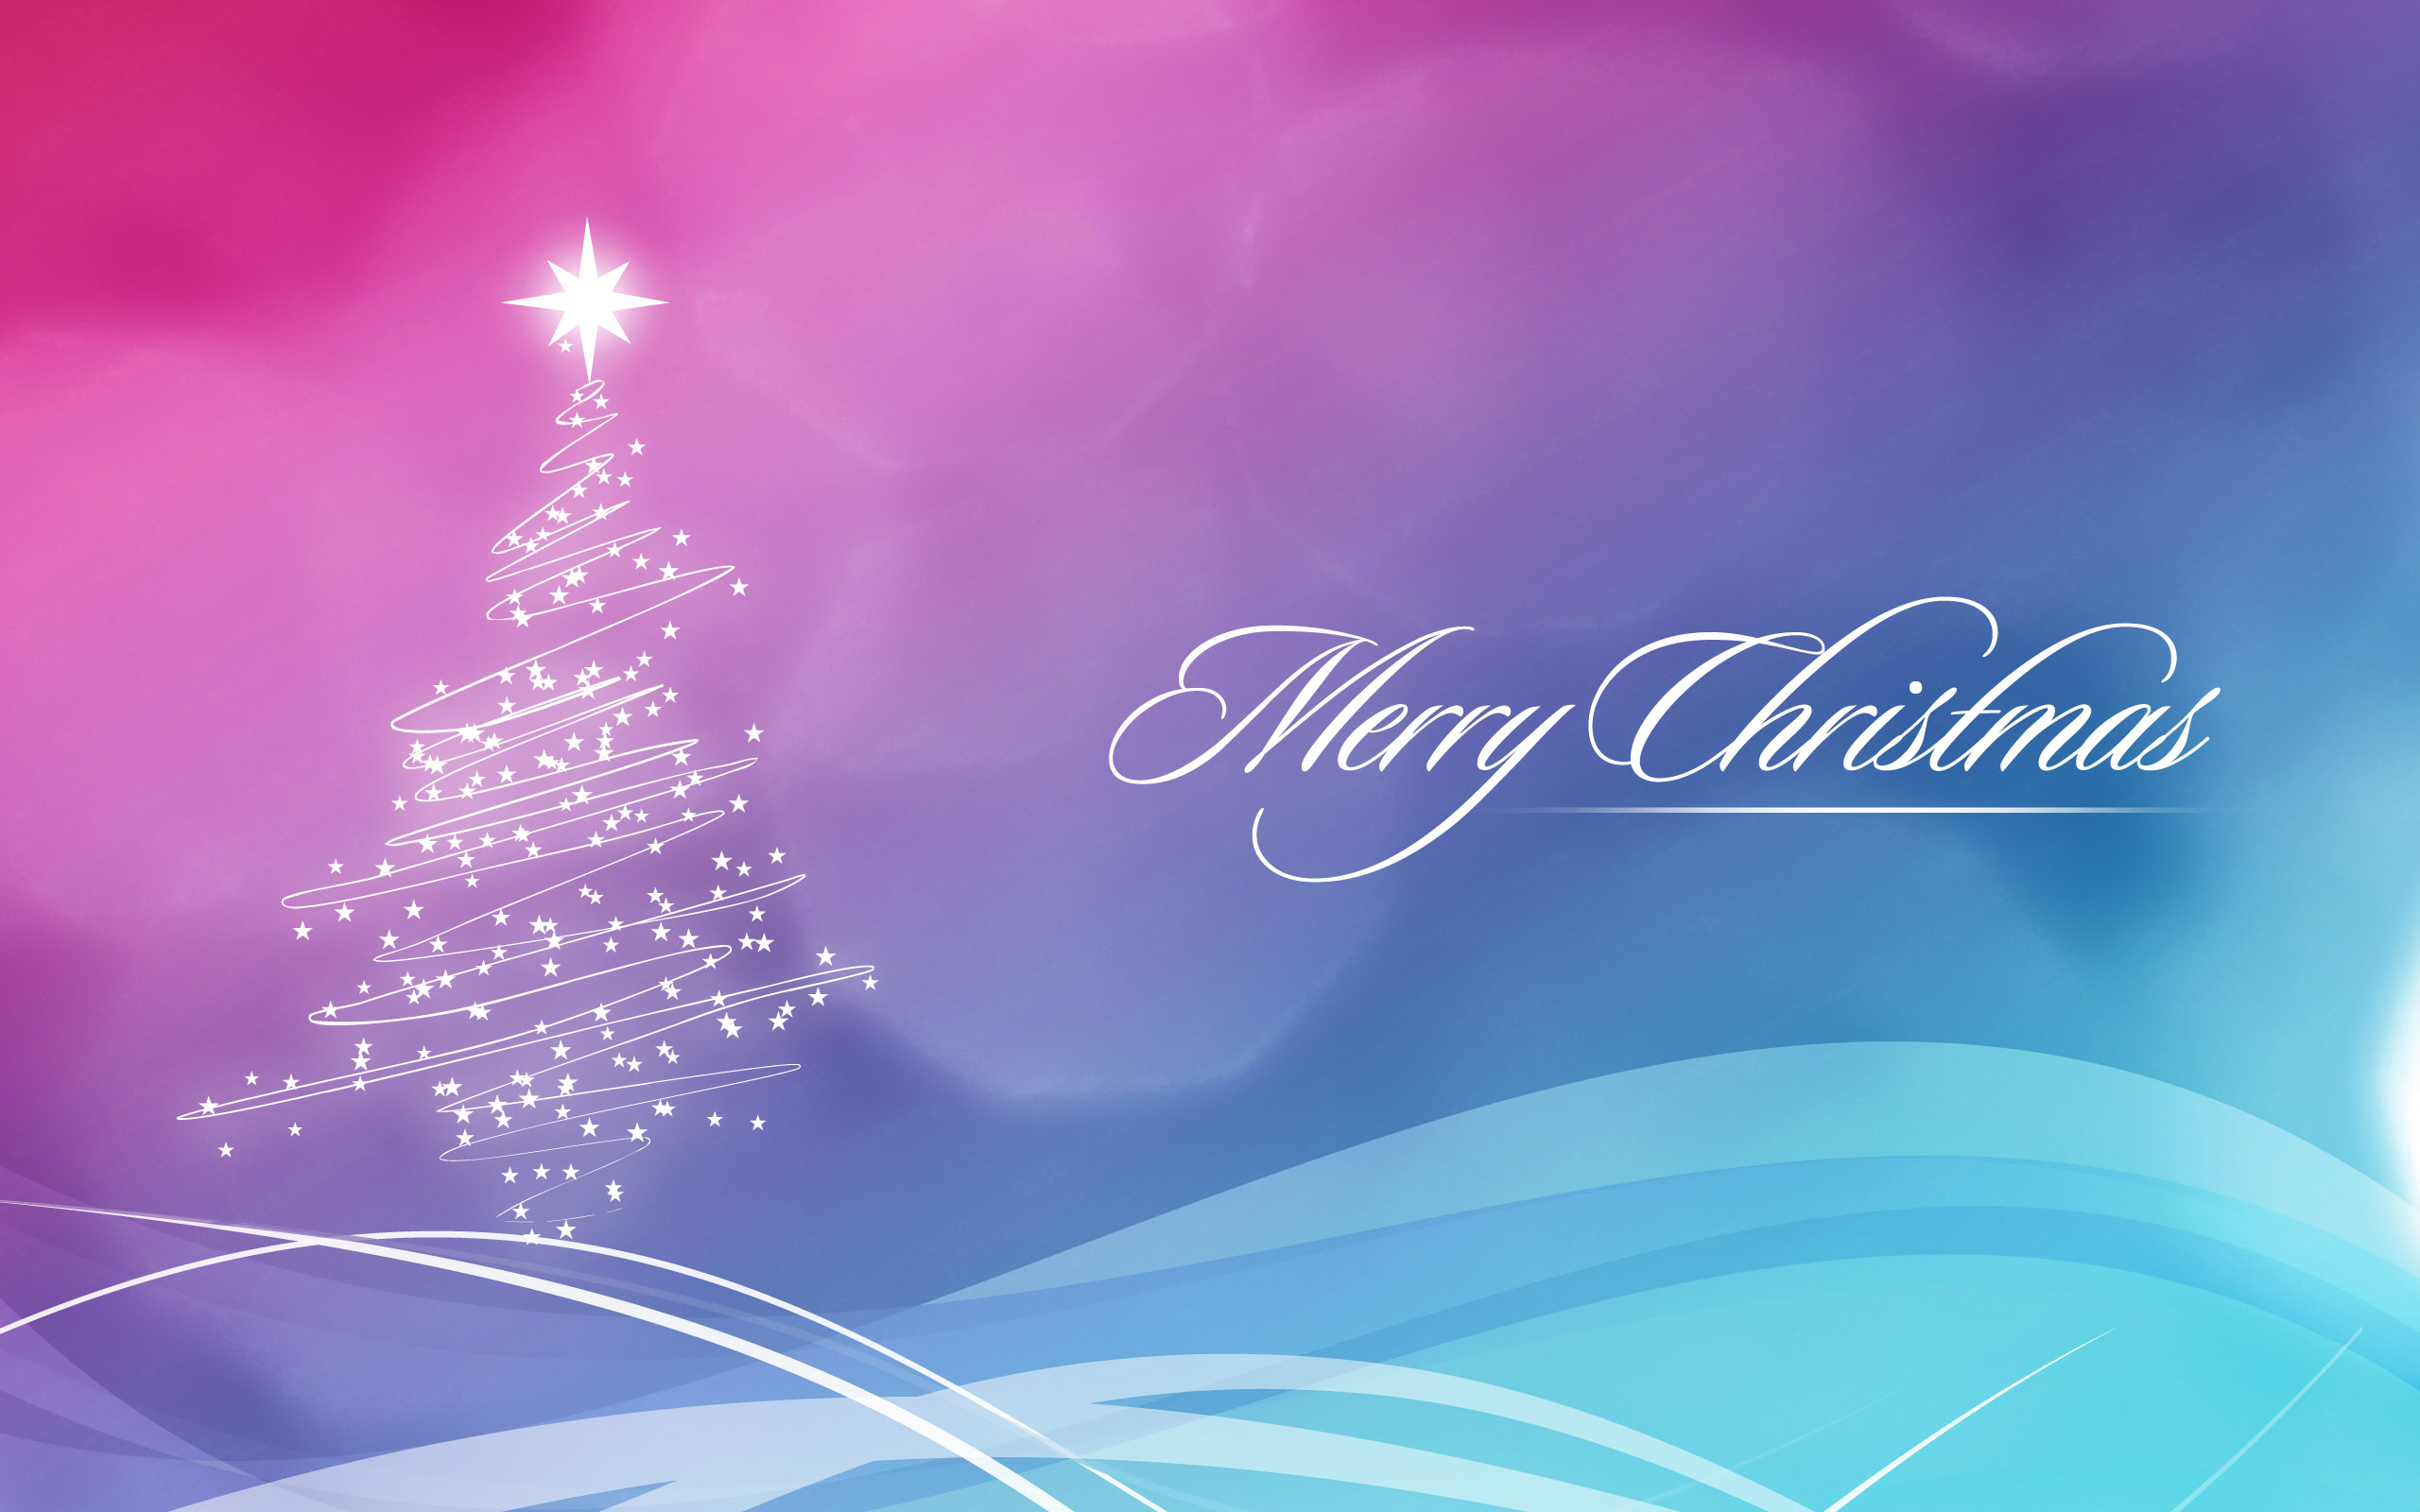 25 Merry Christmas Cover Photos For Timeline